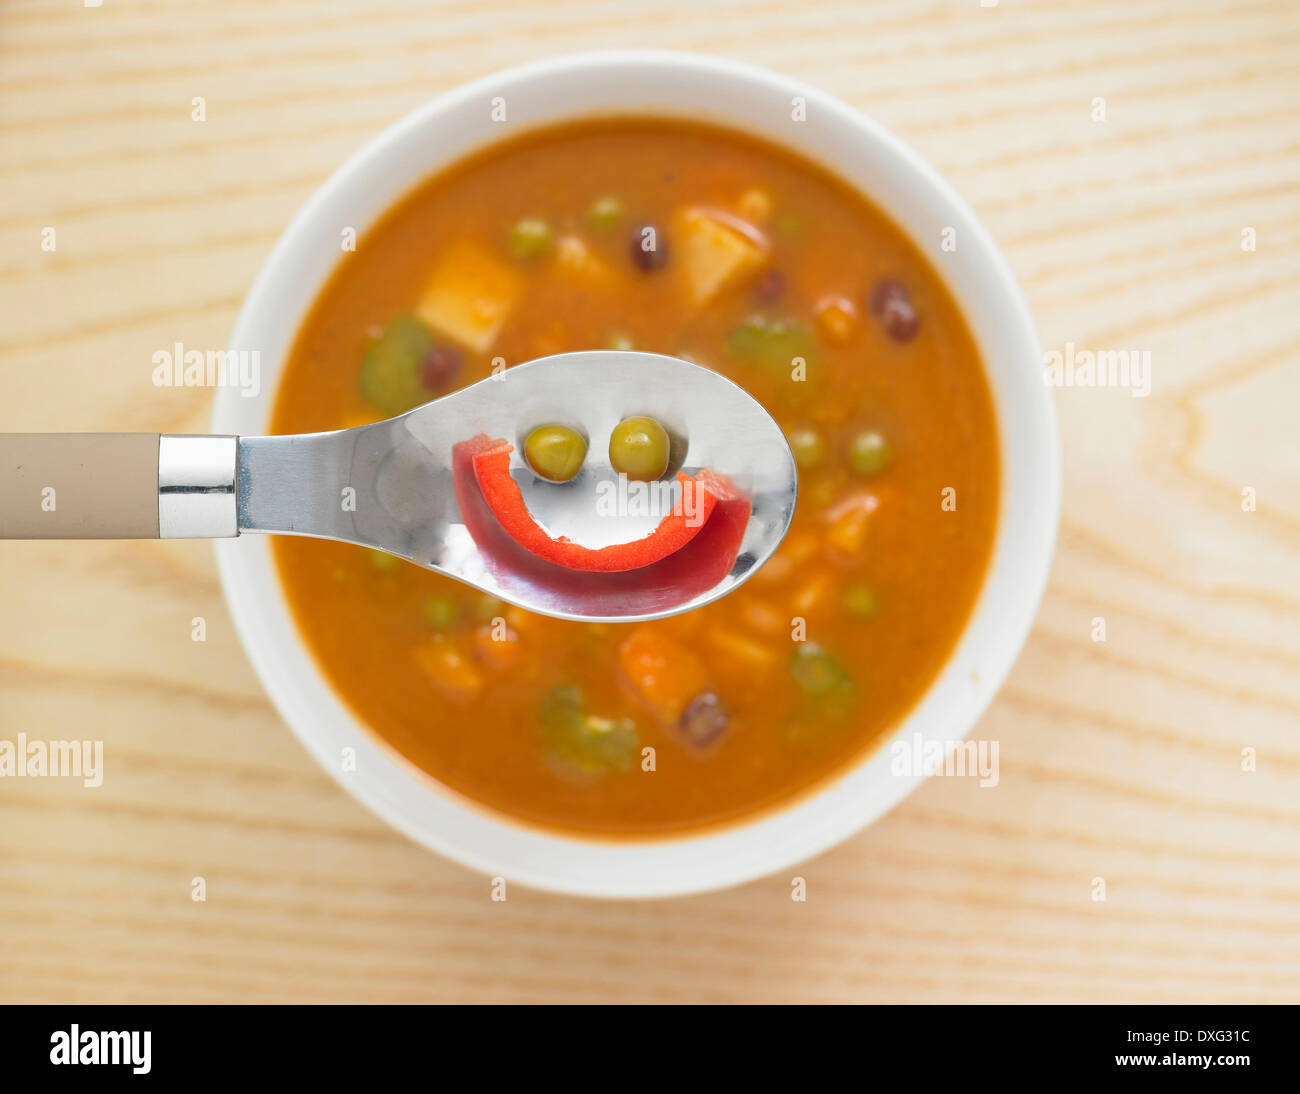 Smiling Face In Spoon Of Vegetable Soup Stock Photo